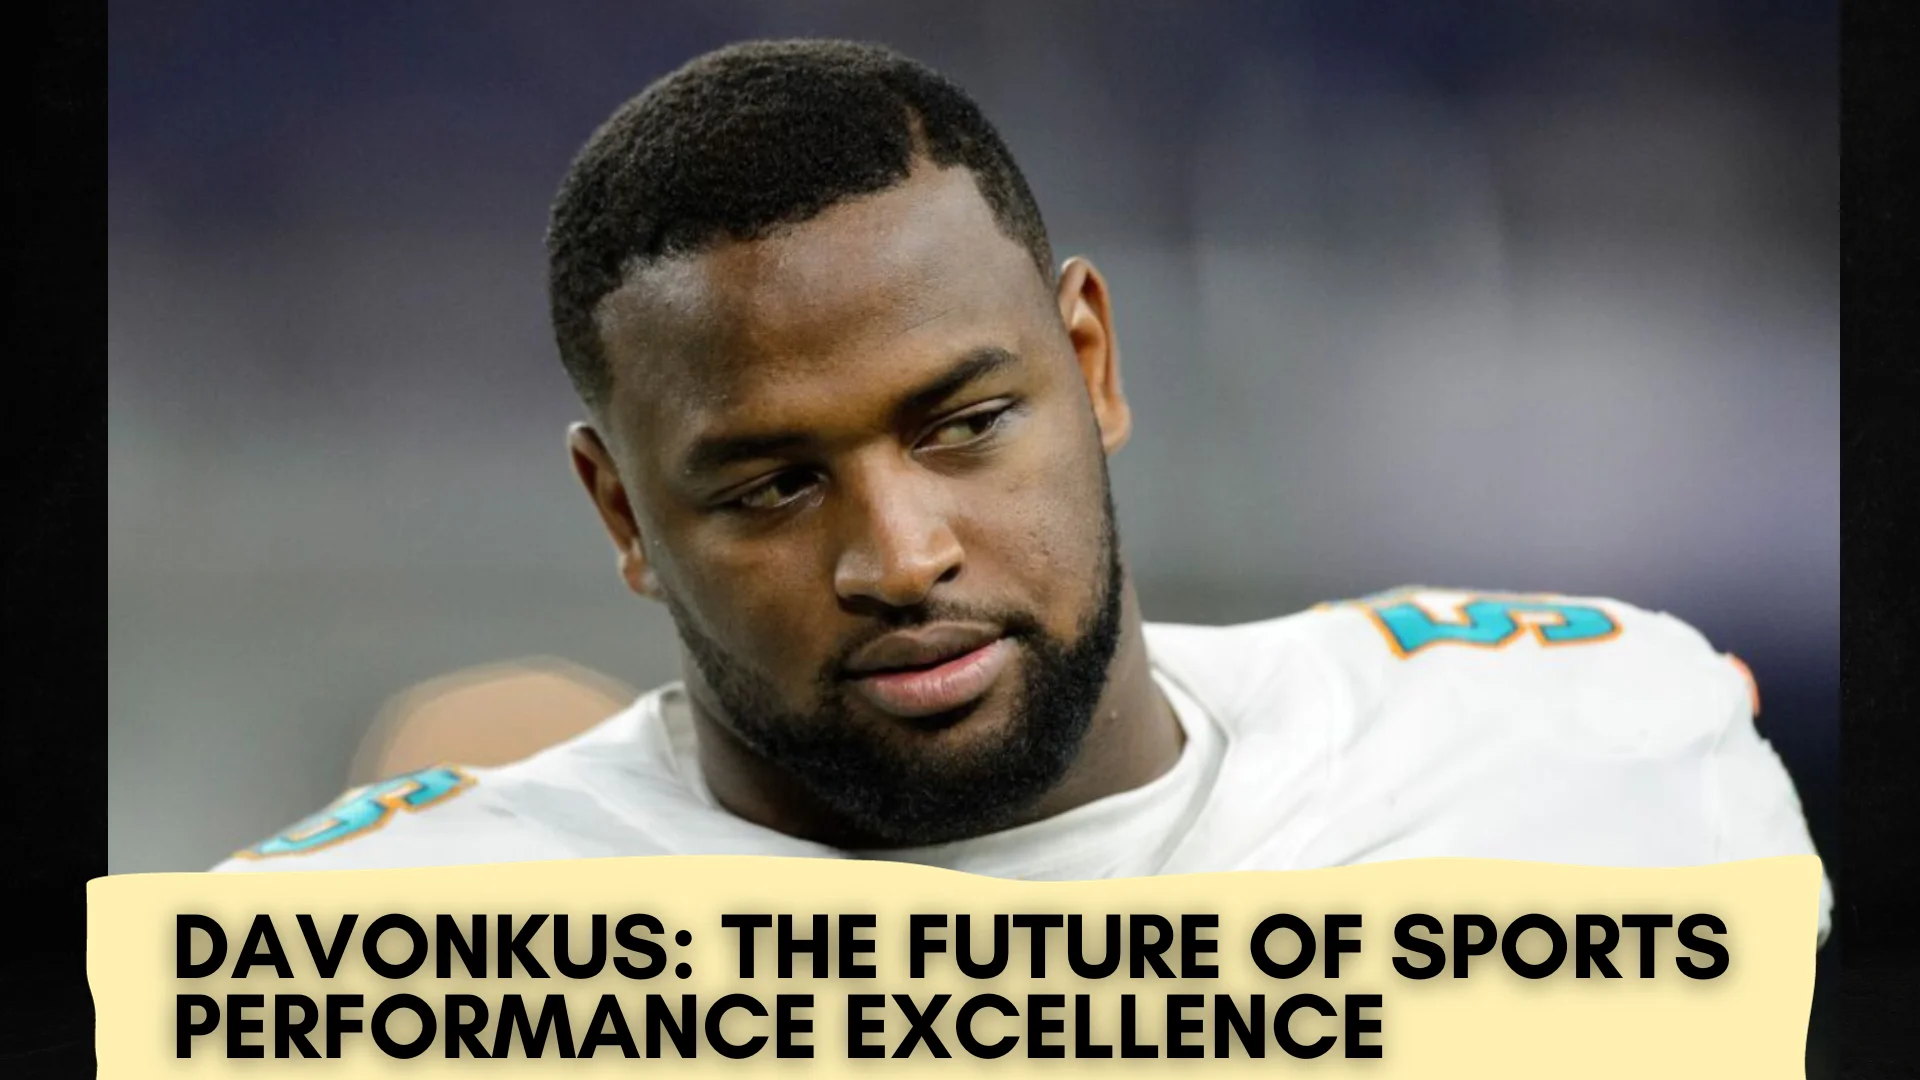 The image depicts a close-up of an athlete, presumably a professional football player, as suggested by the shoulder pads under his jersey. The jersey features a prominent number and possibly a team logo, although the details are not clear. The athlete has a focused and serious expression, suggesting contemplation or determination. Overlaying the photo is a banner with the text "DAVONKUS: THE FUTURE OF SPORTS PERFORMANCE EXCELLENCE," indicating that the individual is being highlighted for his potential and expected impact in the sports field. The choice of bold, capitalized font for the text conveys importance and confidence in the athlete's capabilities. The overall composition of the image serves to present the athlete as a significant figure in the context of sports performance.